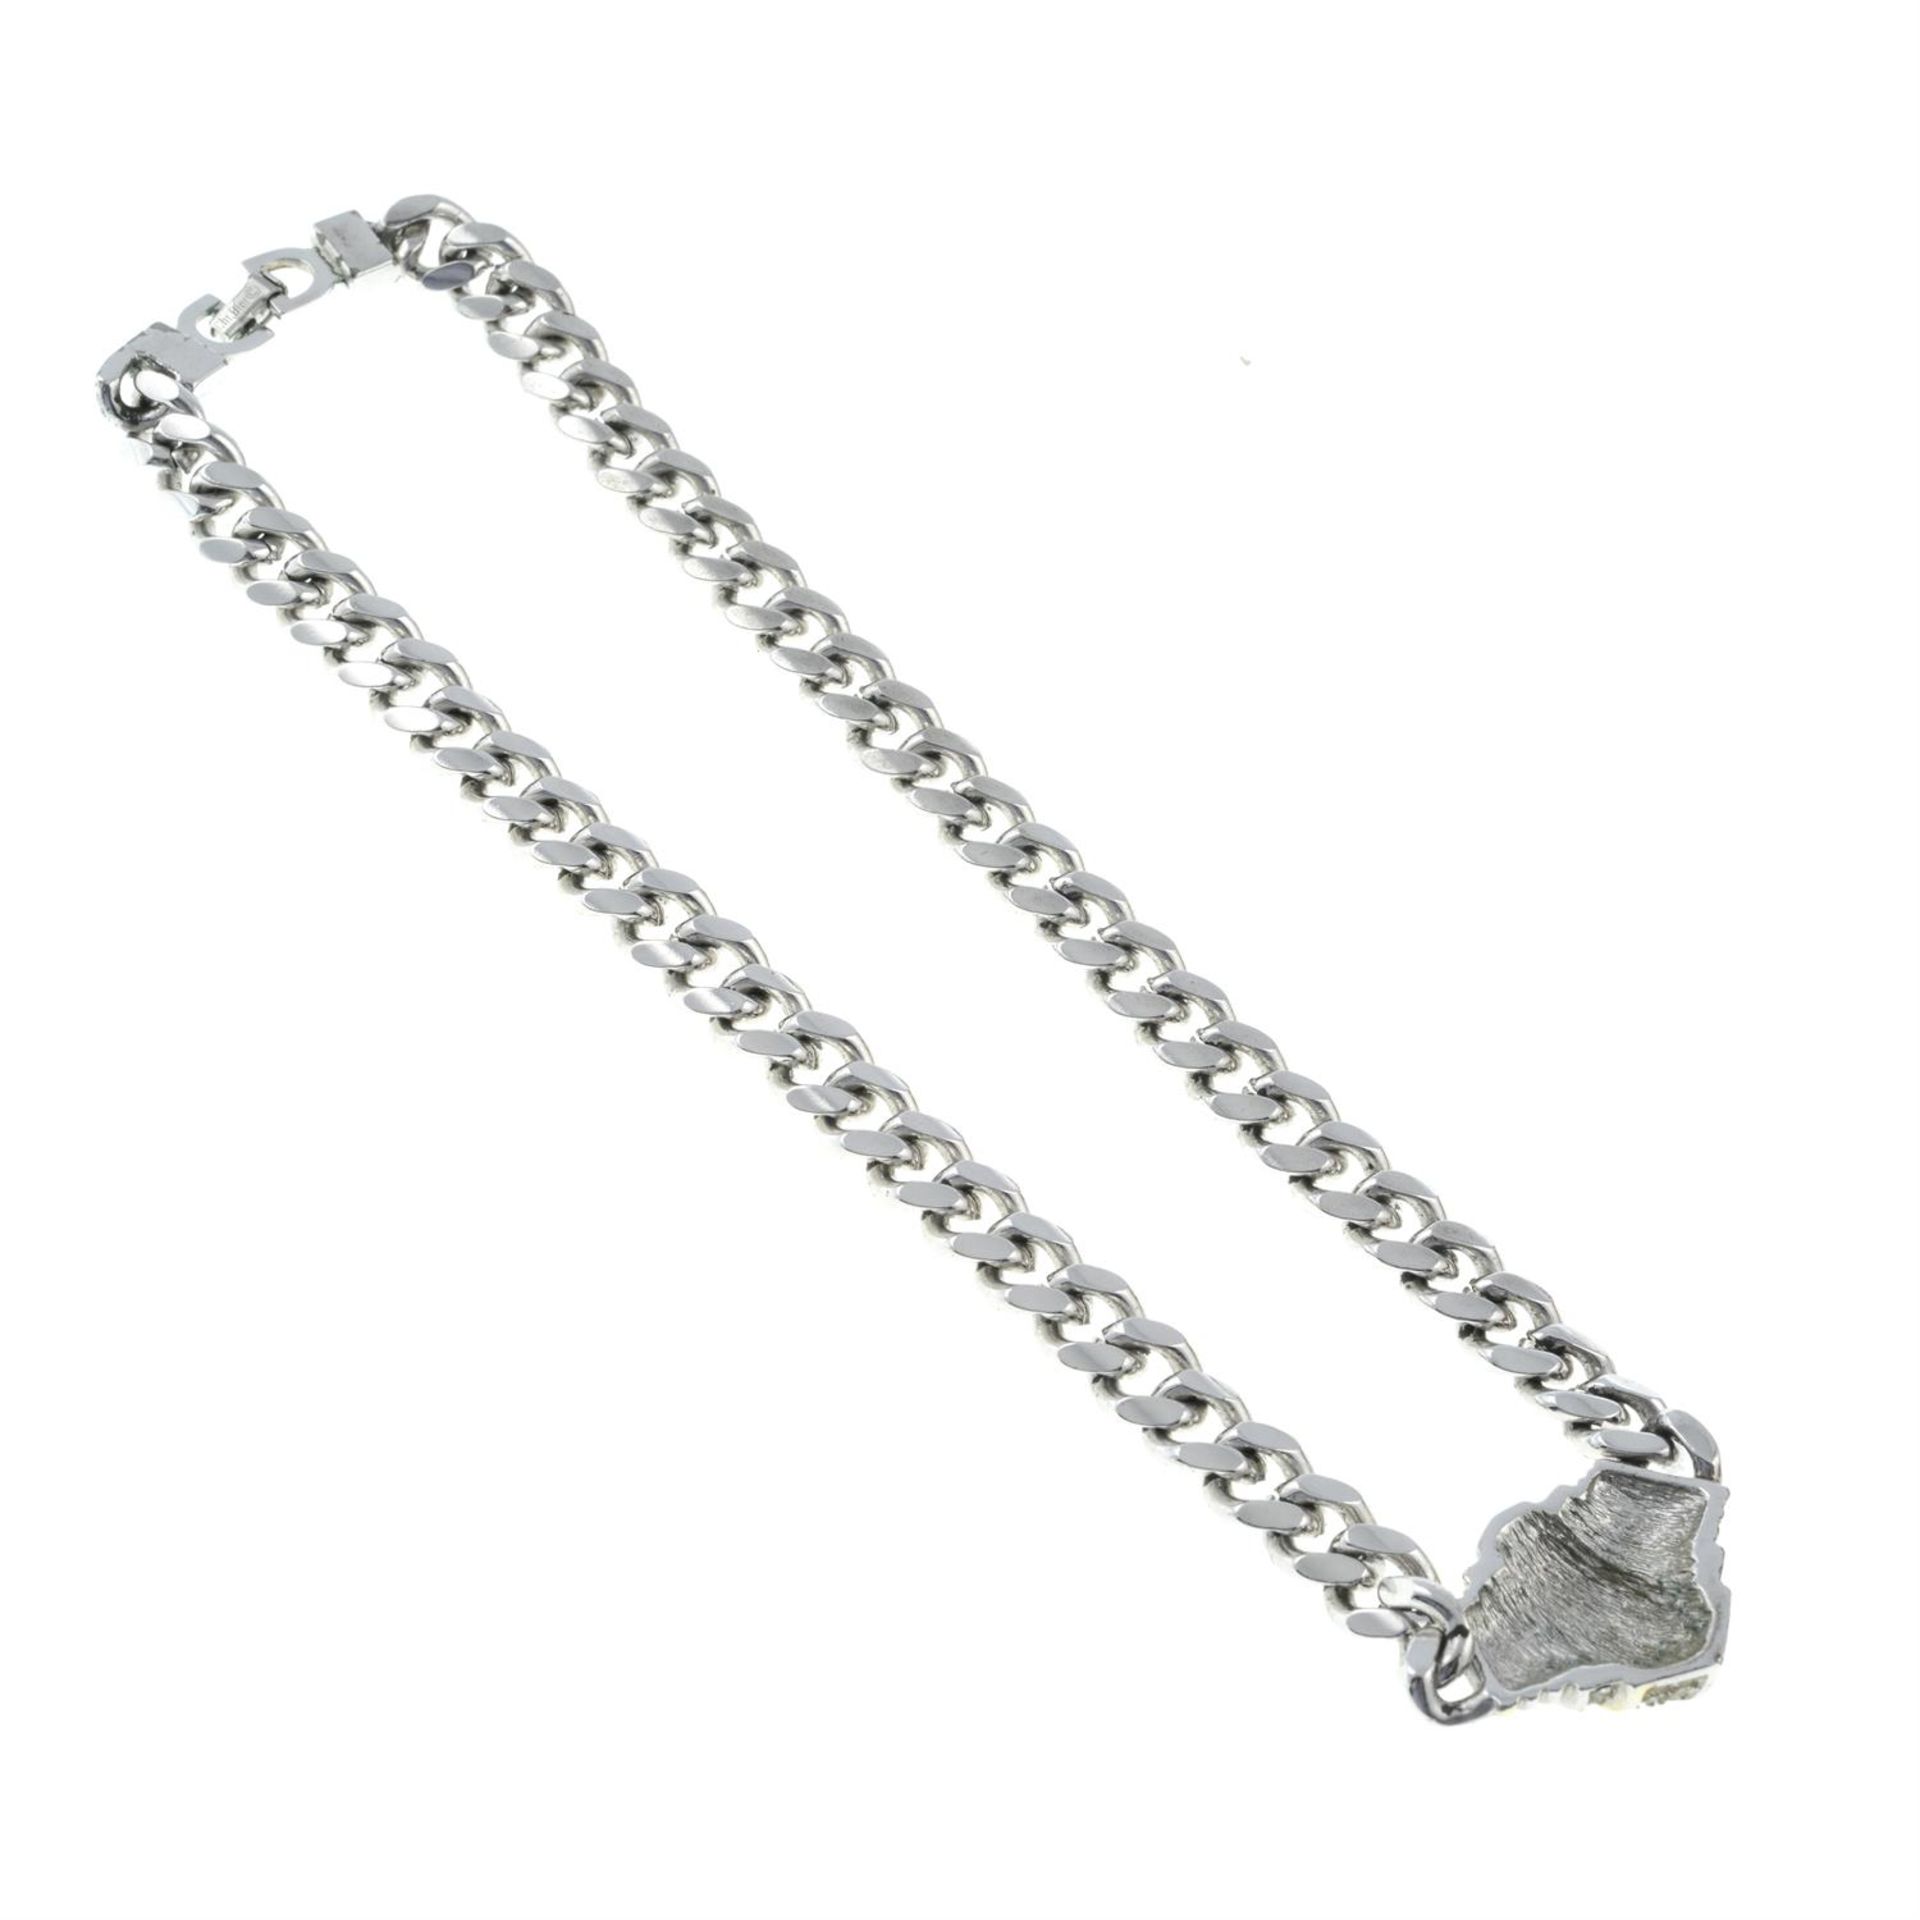 CHRISTIAN DIOR - a chain necklace with integral clear paste pendant. - Image 2 of 2